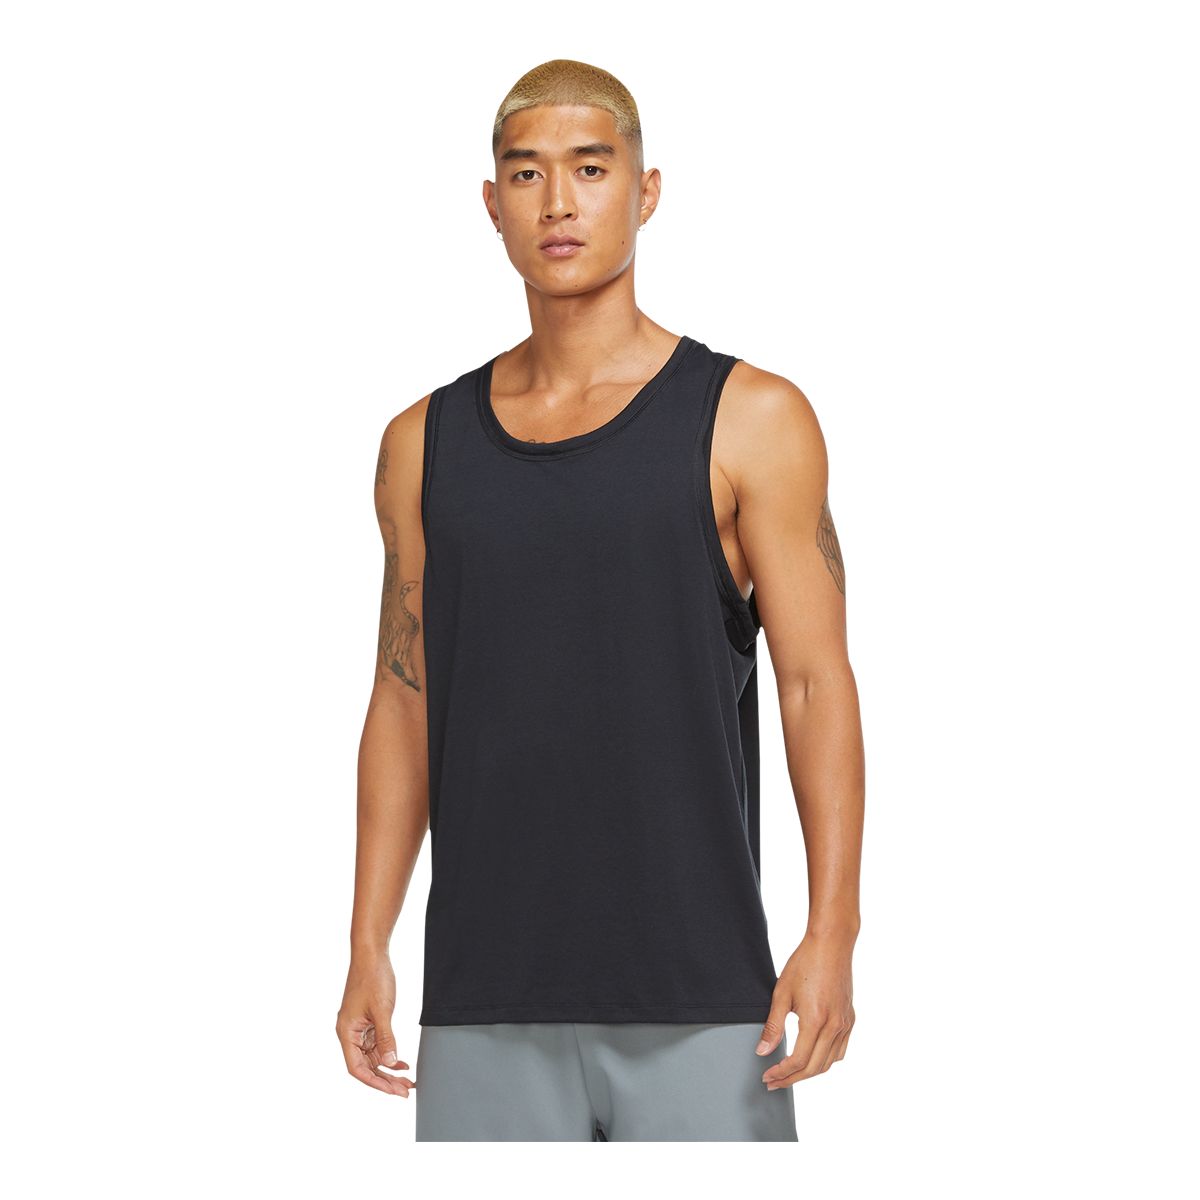 good looking Interconnect widow mens tank top uniqlo handicapped commitment  fell